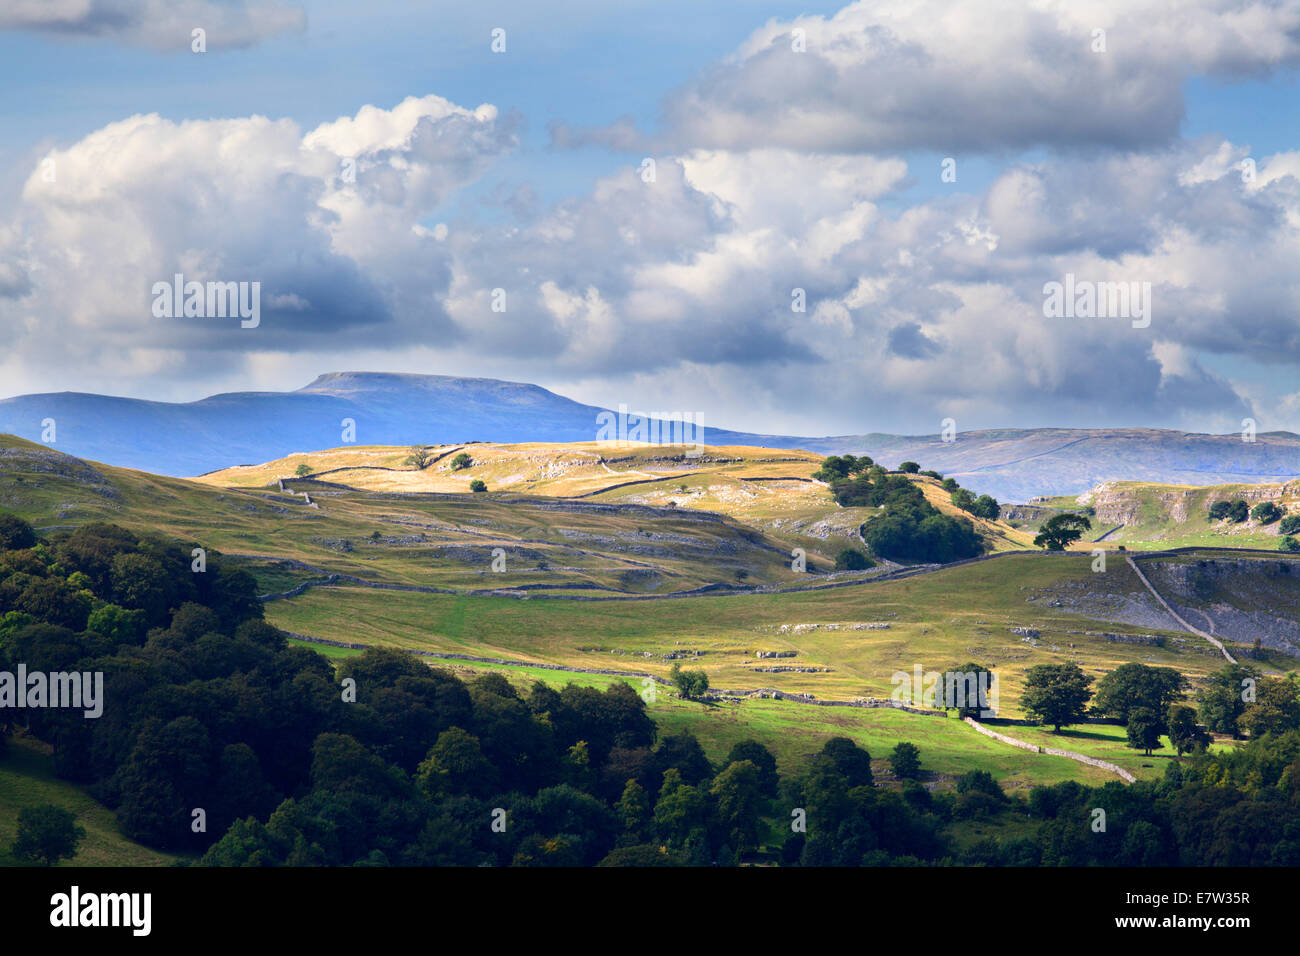 Clouds Gathering Over Ingleborough from Ribblesdale near Settle Yorkshire Dales England Stock Photo